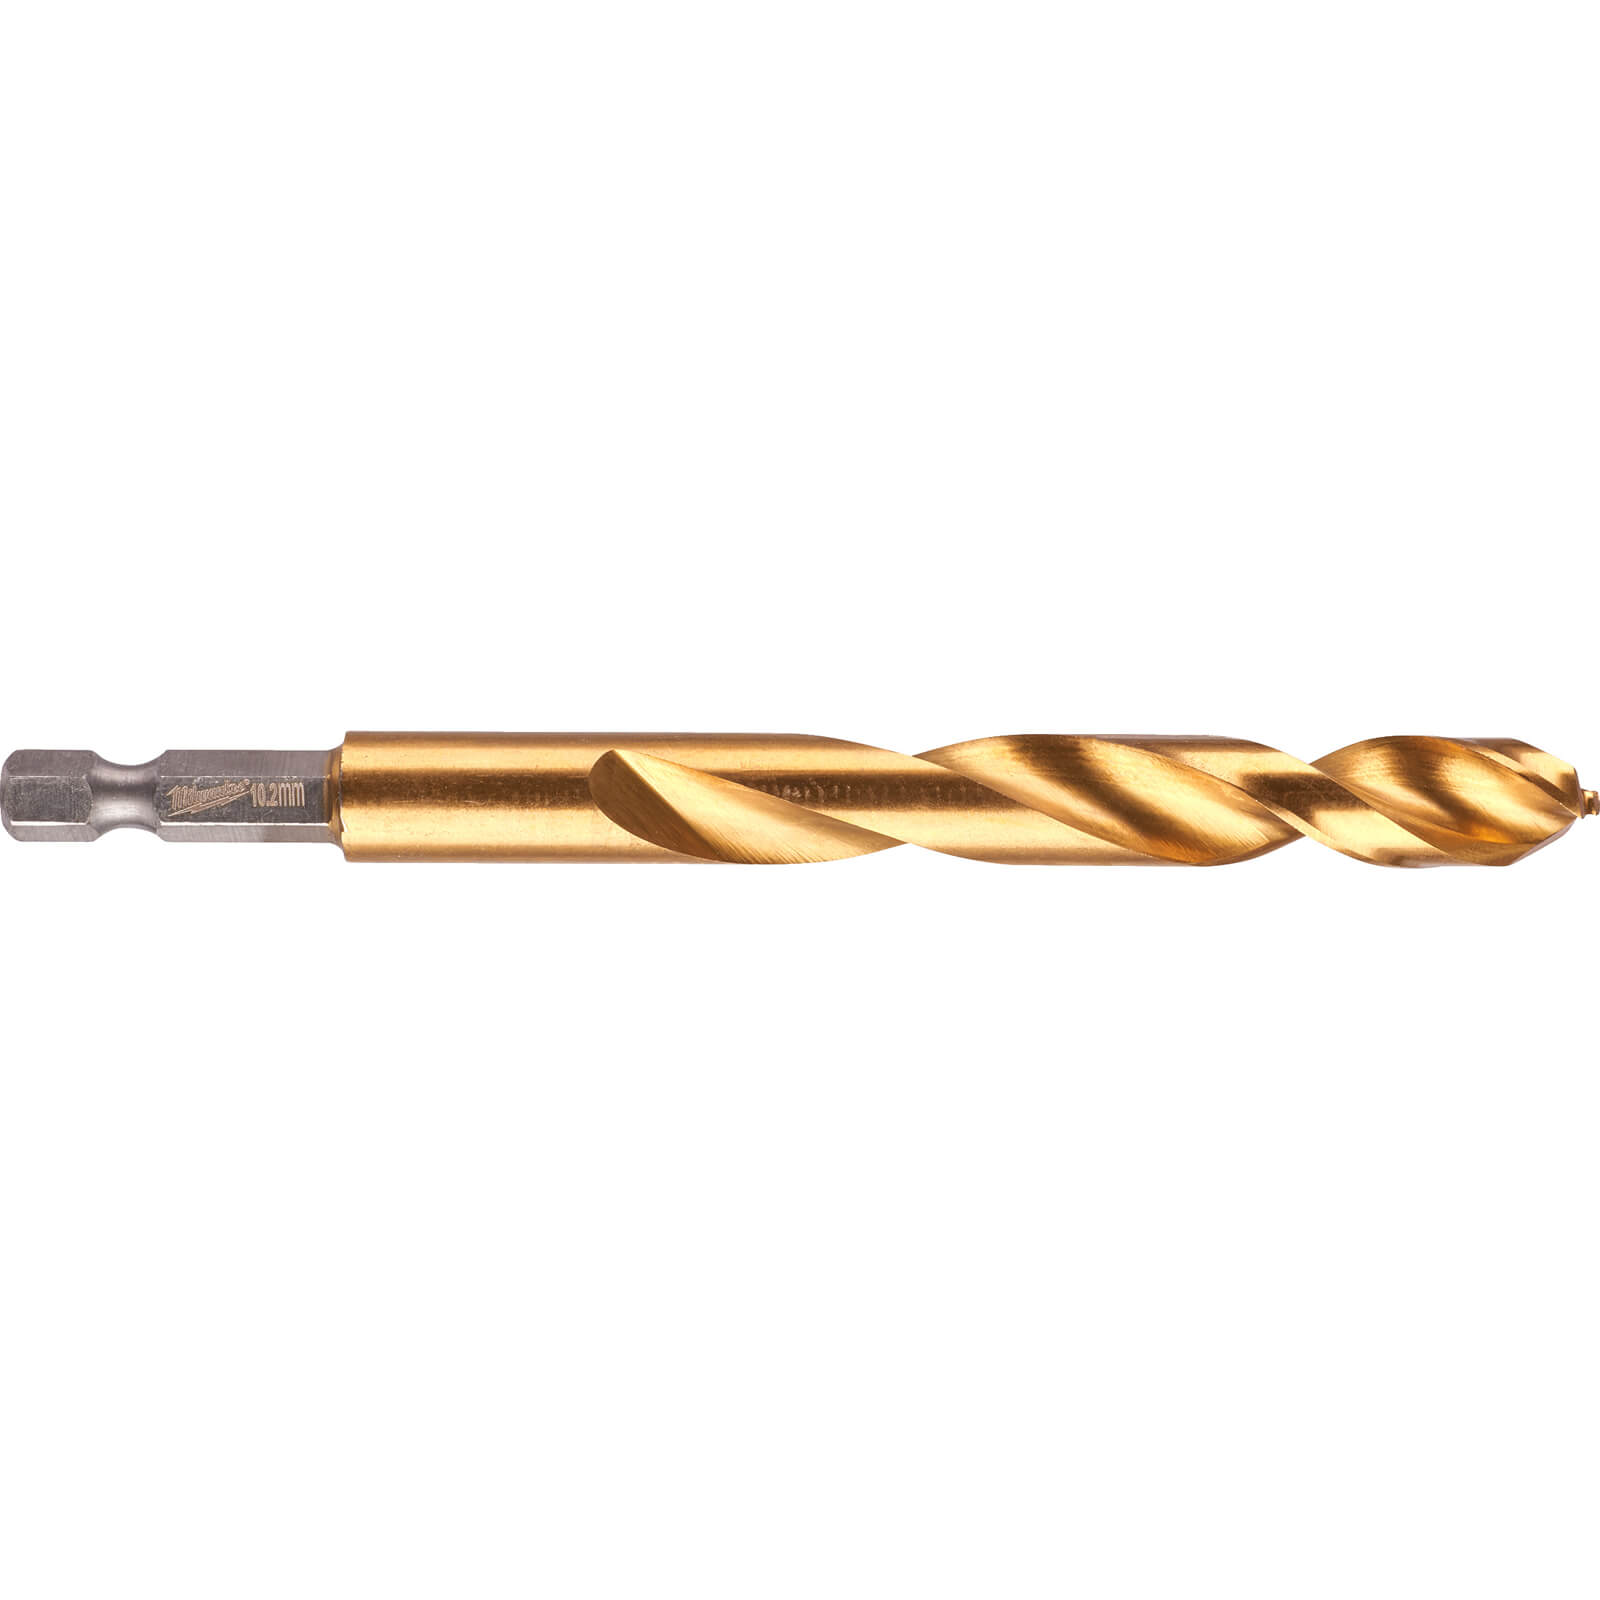 Image of Milwaukee HSS-G Shockwave Drill Bit 10.2mm Pack of 1